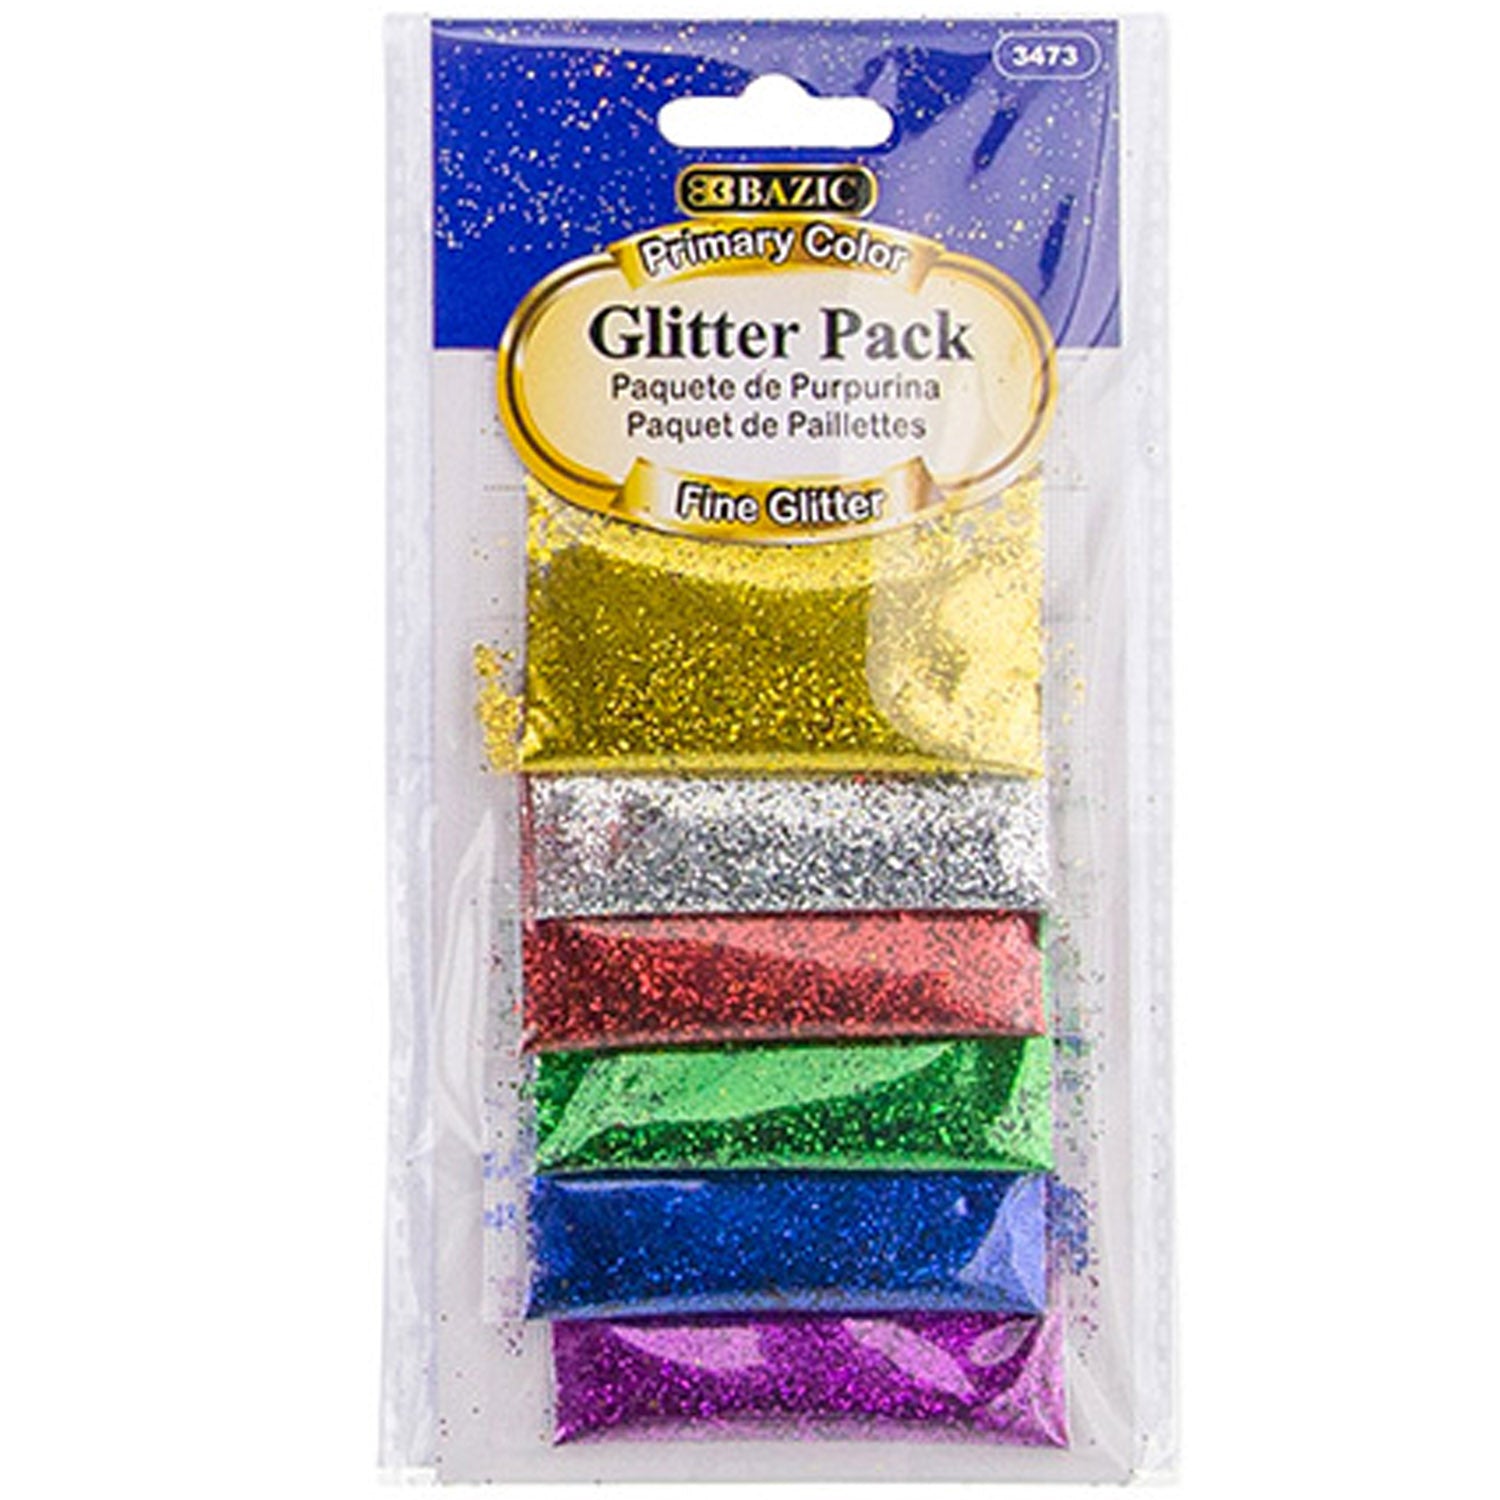 Primary Color Glitter Pack | 0.07 oz (2g)